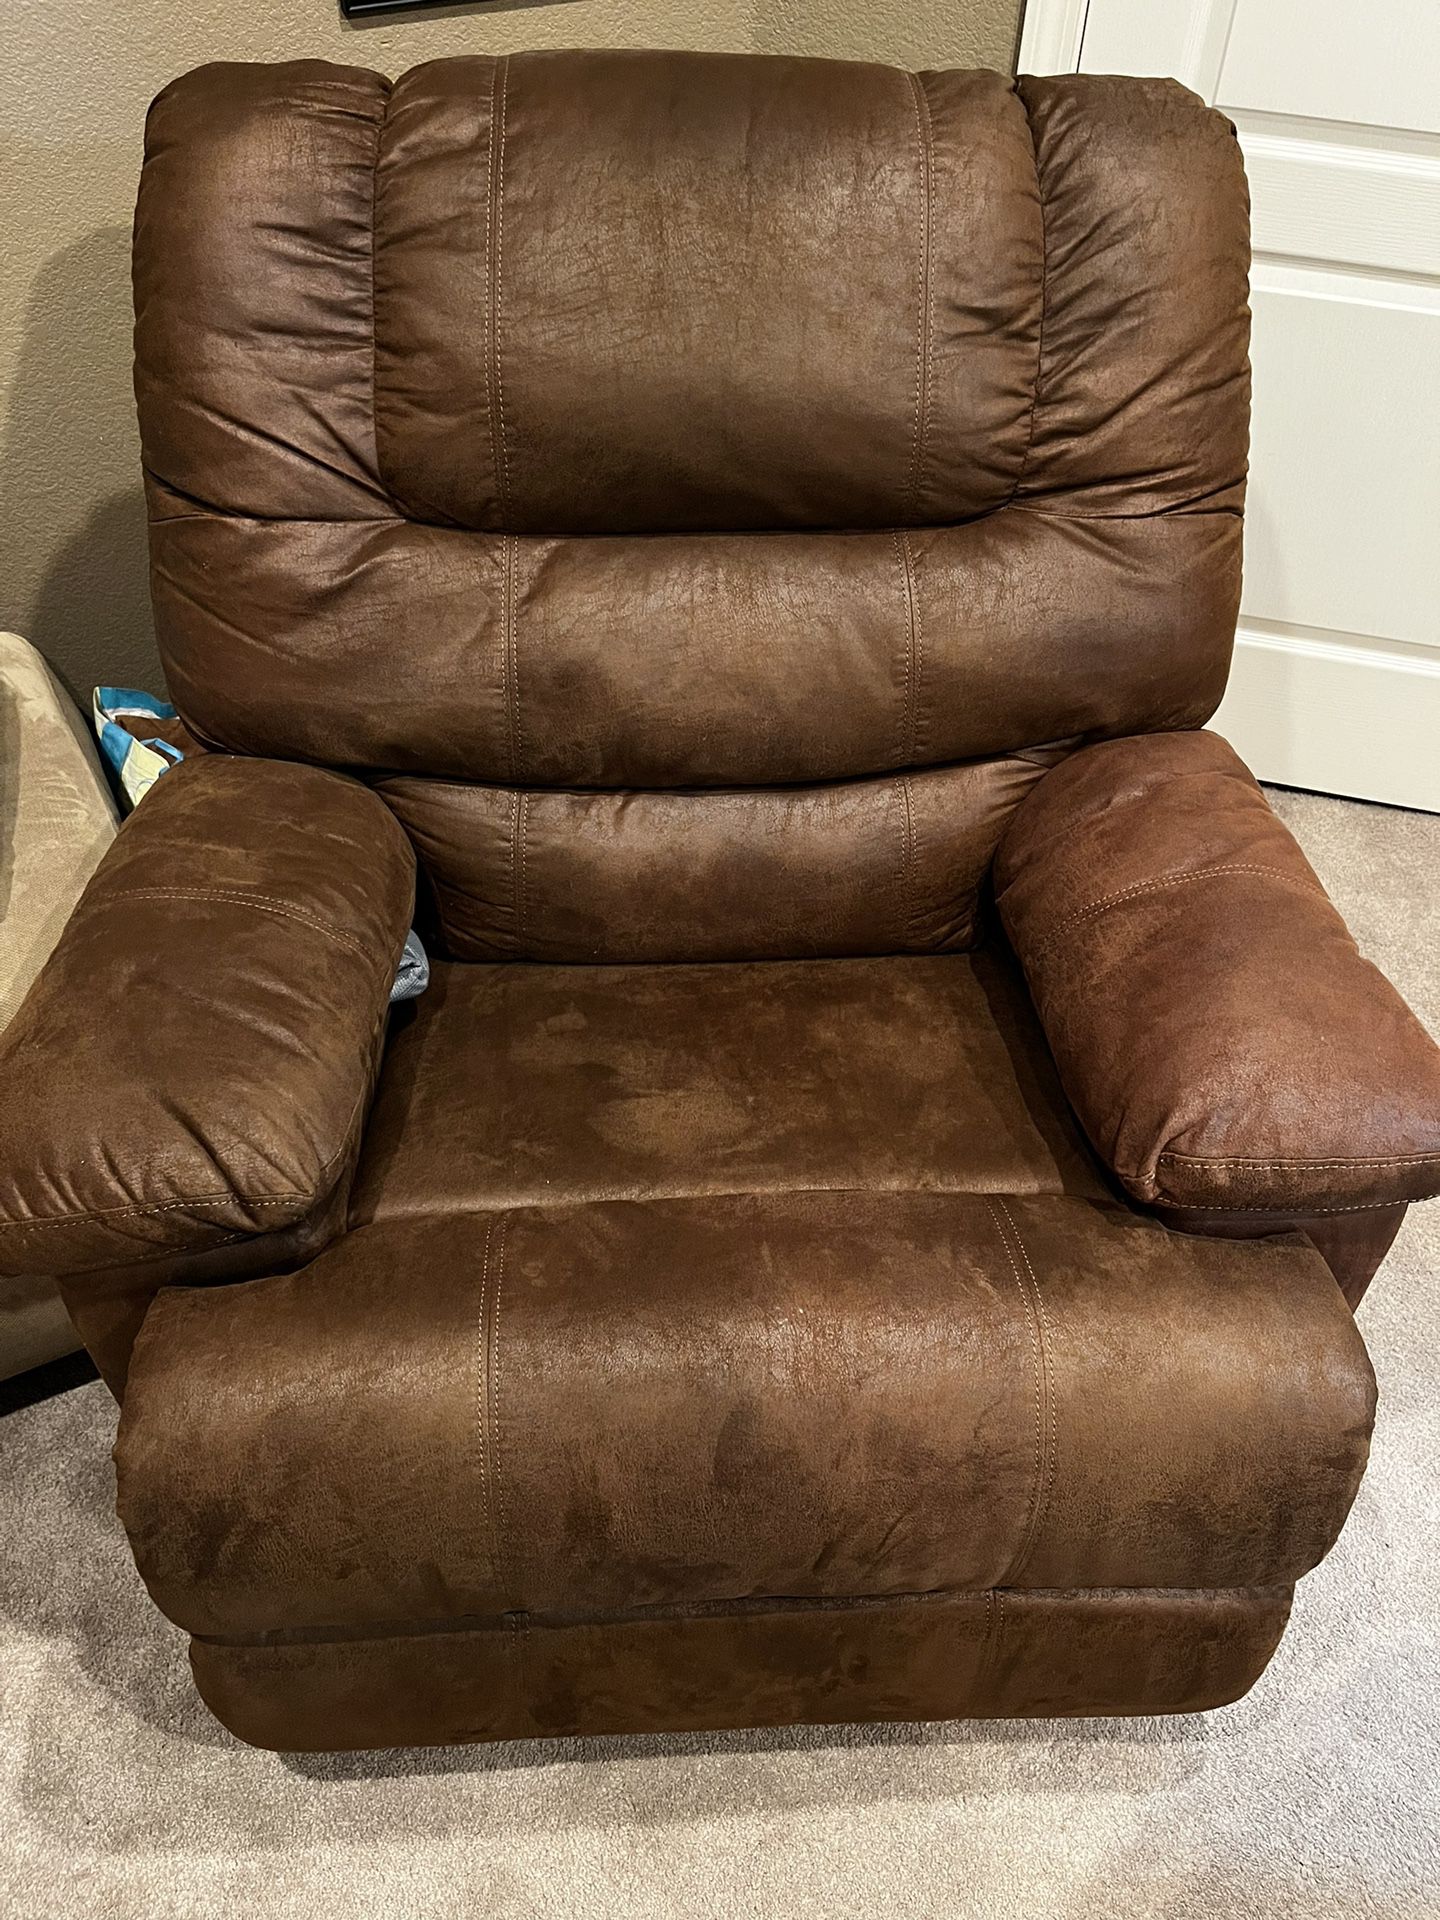 Recliner Chair With Storage